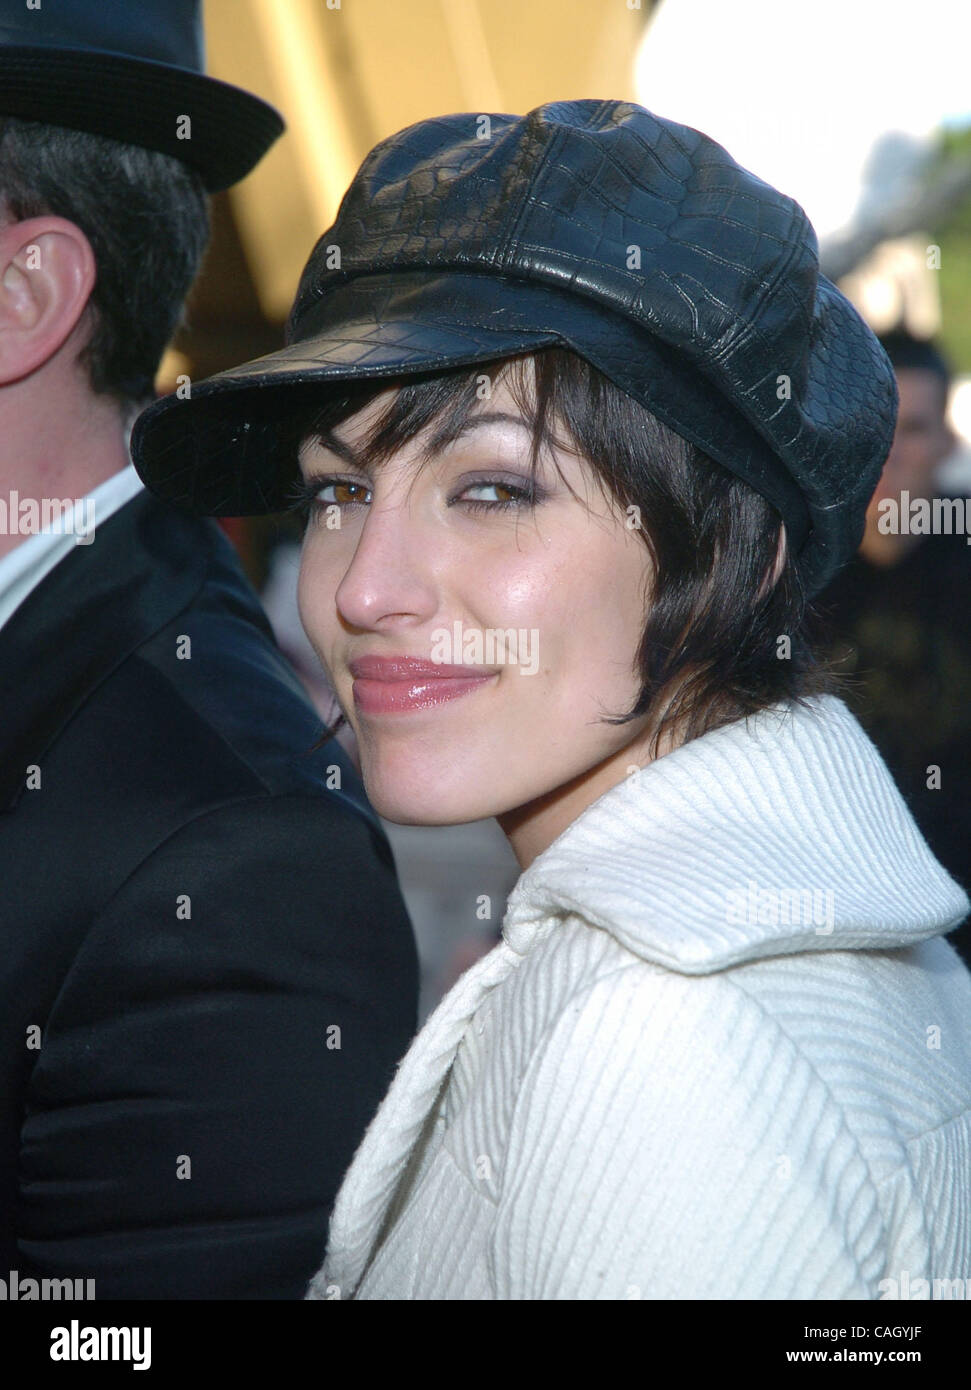 JENIFER AYACHE from Rock band SUPERBUS arrives at the 2008 NRJ Music Awards at the Palais des Festivals - Cannes. Stock Photo